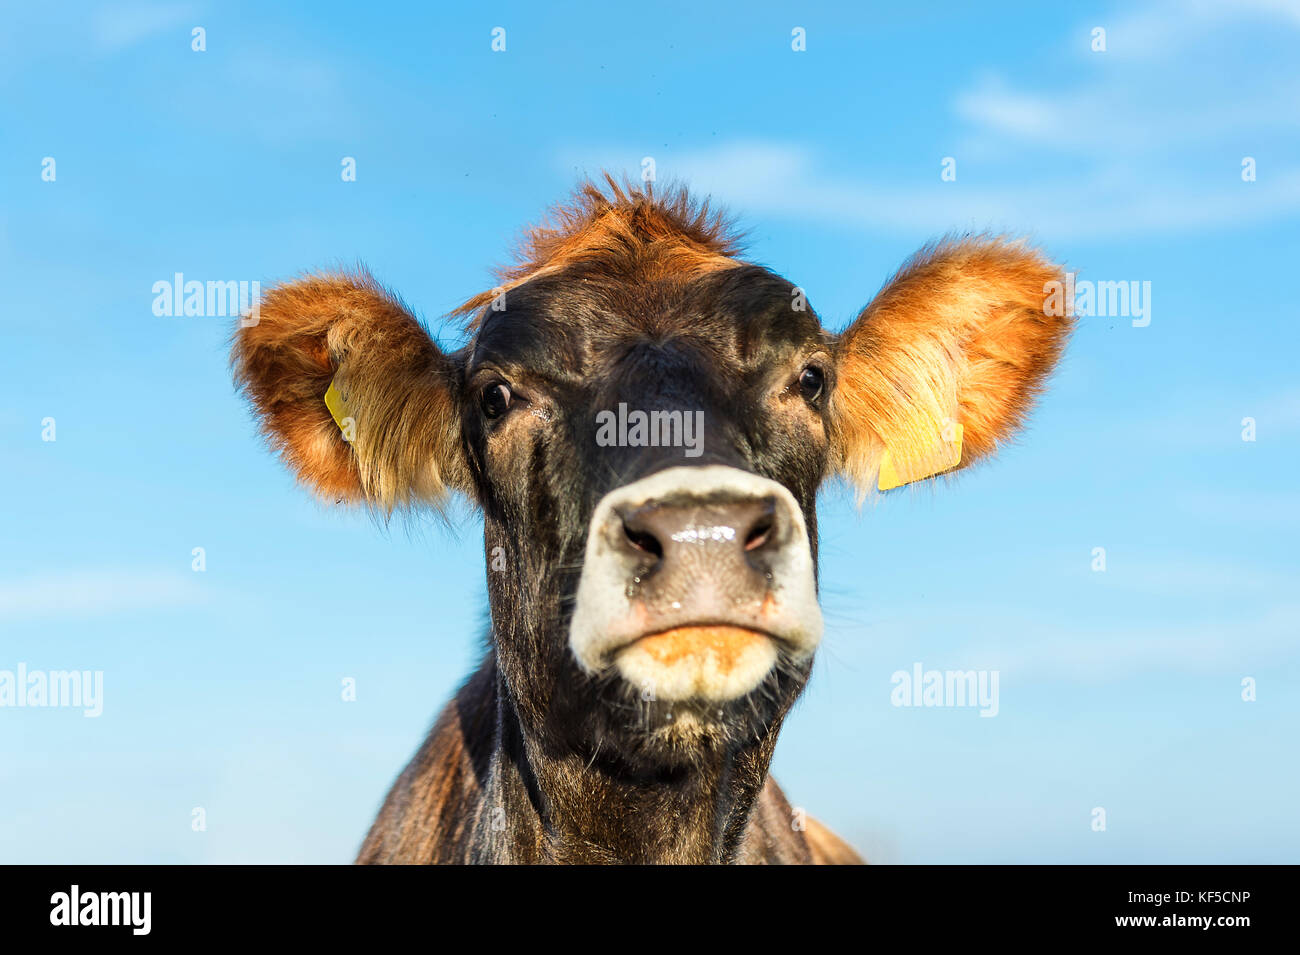 Cow says: Keep calm! Cow's portrait in front of blue sky Stock Photo